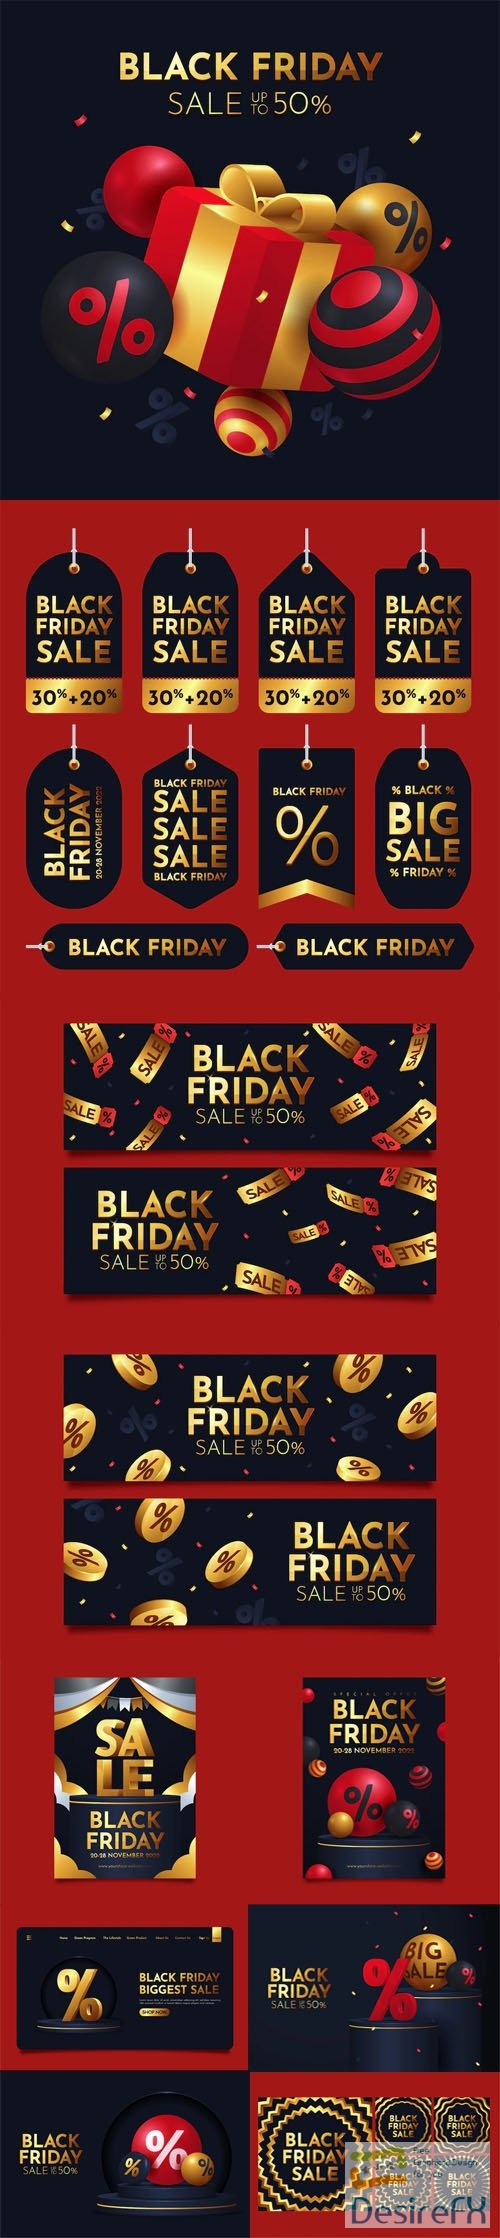 Black Friday - 10 Awesome Black & Gold Vector Templates Pack